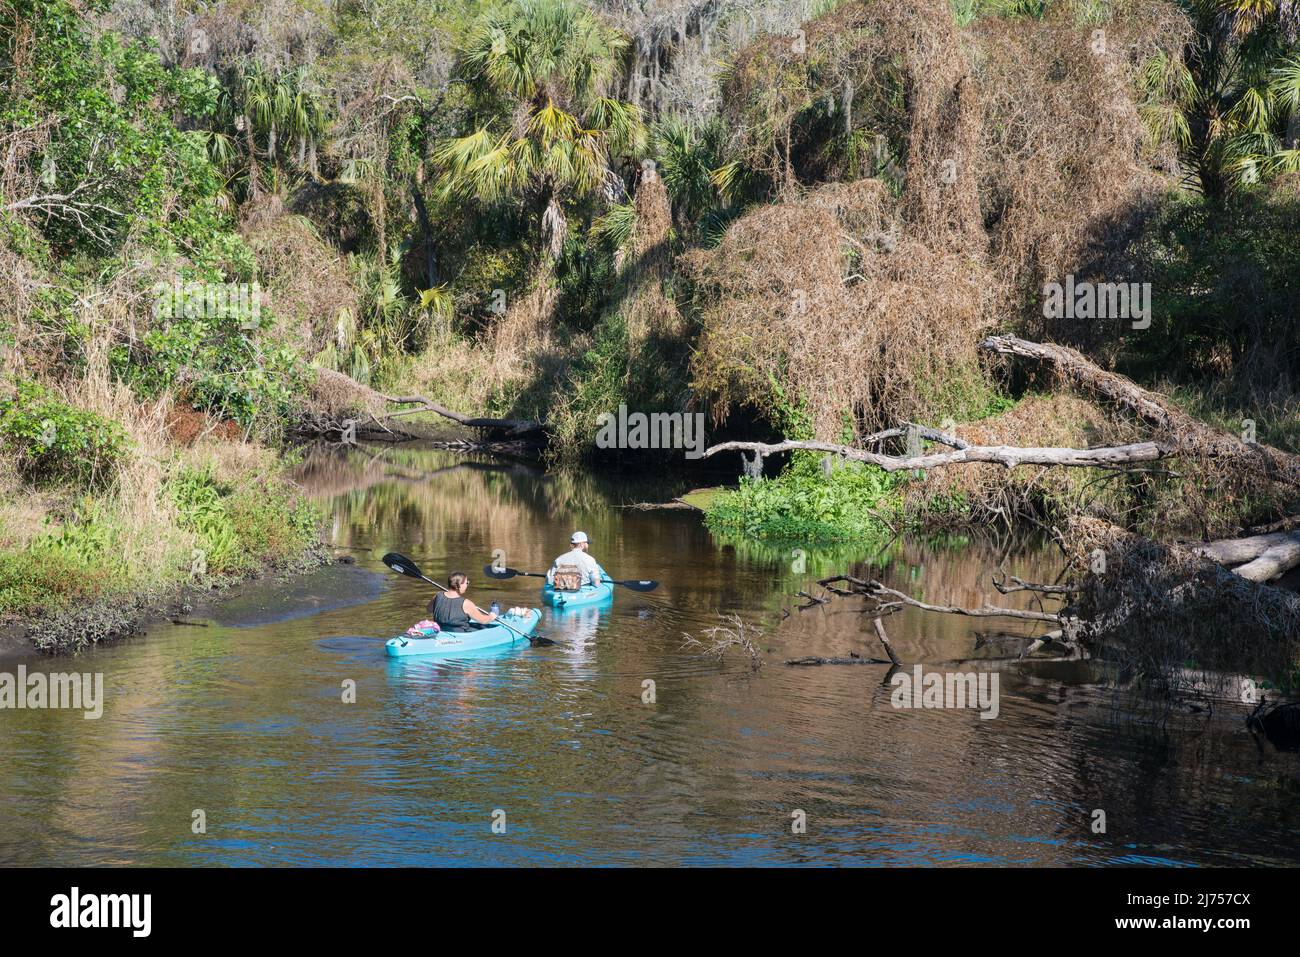 Kayakers on the Little Manatee River in Little Manatee River State Park, Florida, USA. An 'Old Florida' landscape. Stock Photo